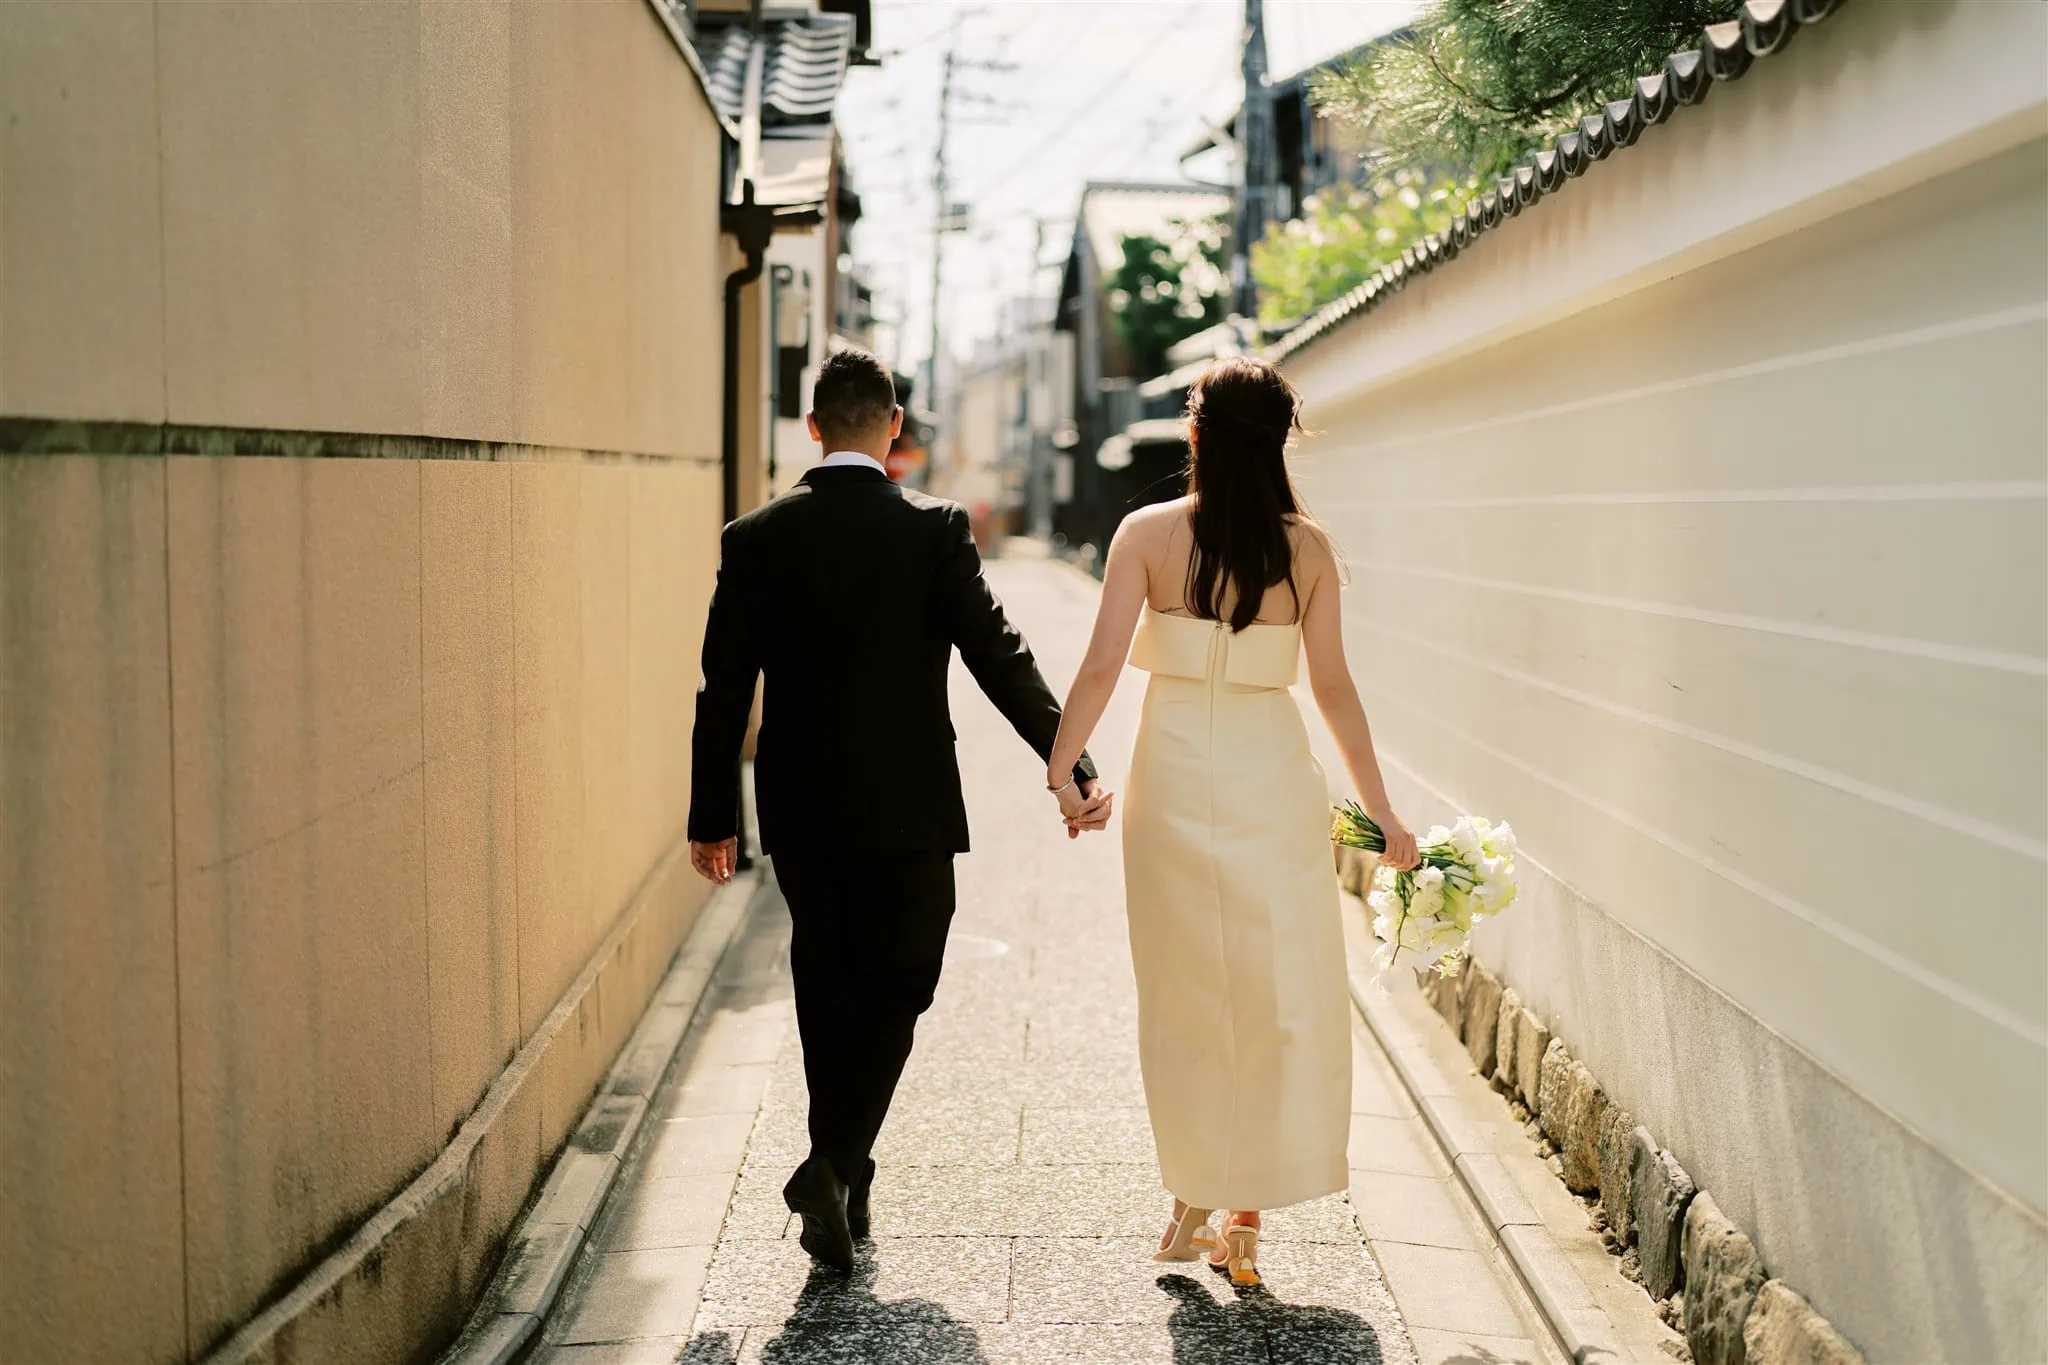 Kyoto Tokyo Japan Elopement Wedding Photographer, Planner & Videographer | A bride and groom elegantly strolling down a narrow alleyway in Japan during their elopement ceremony.